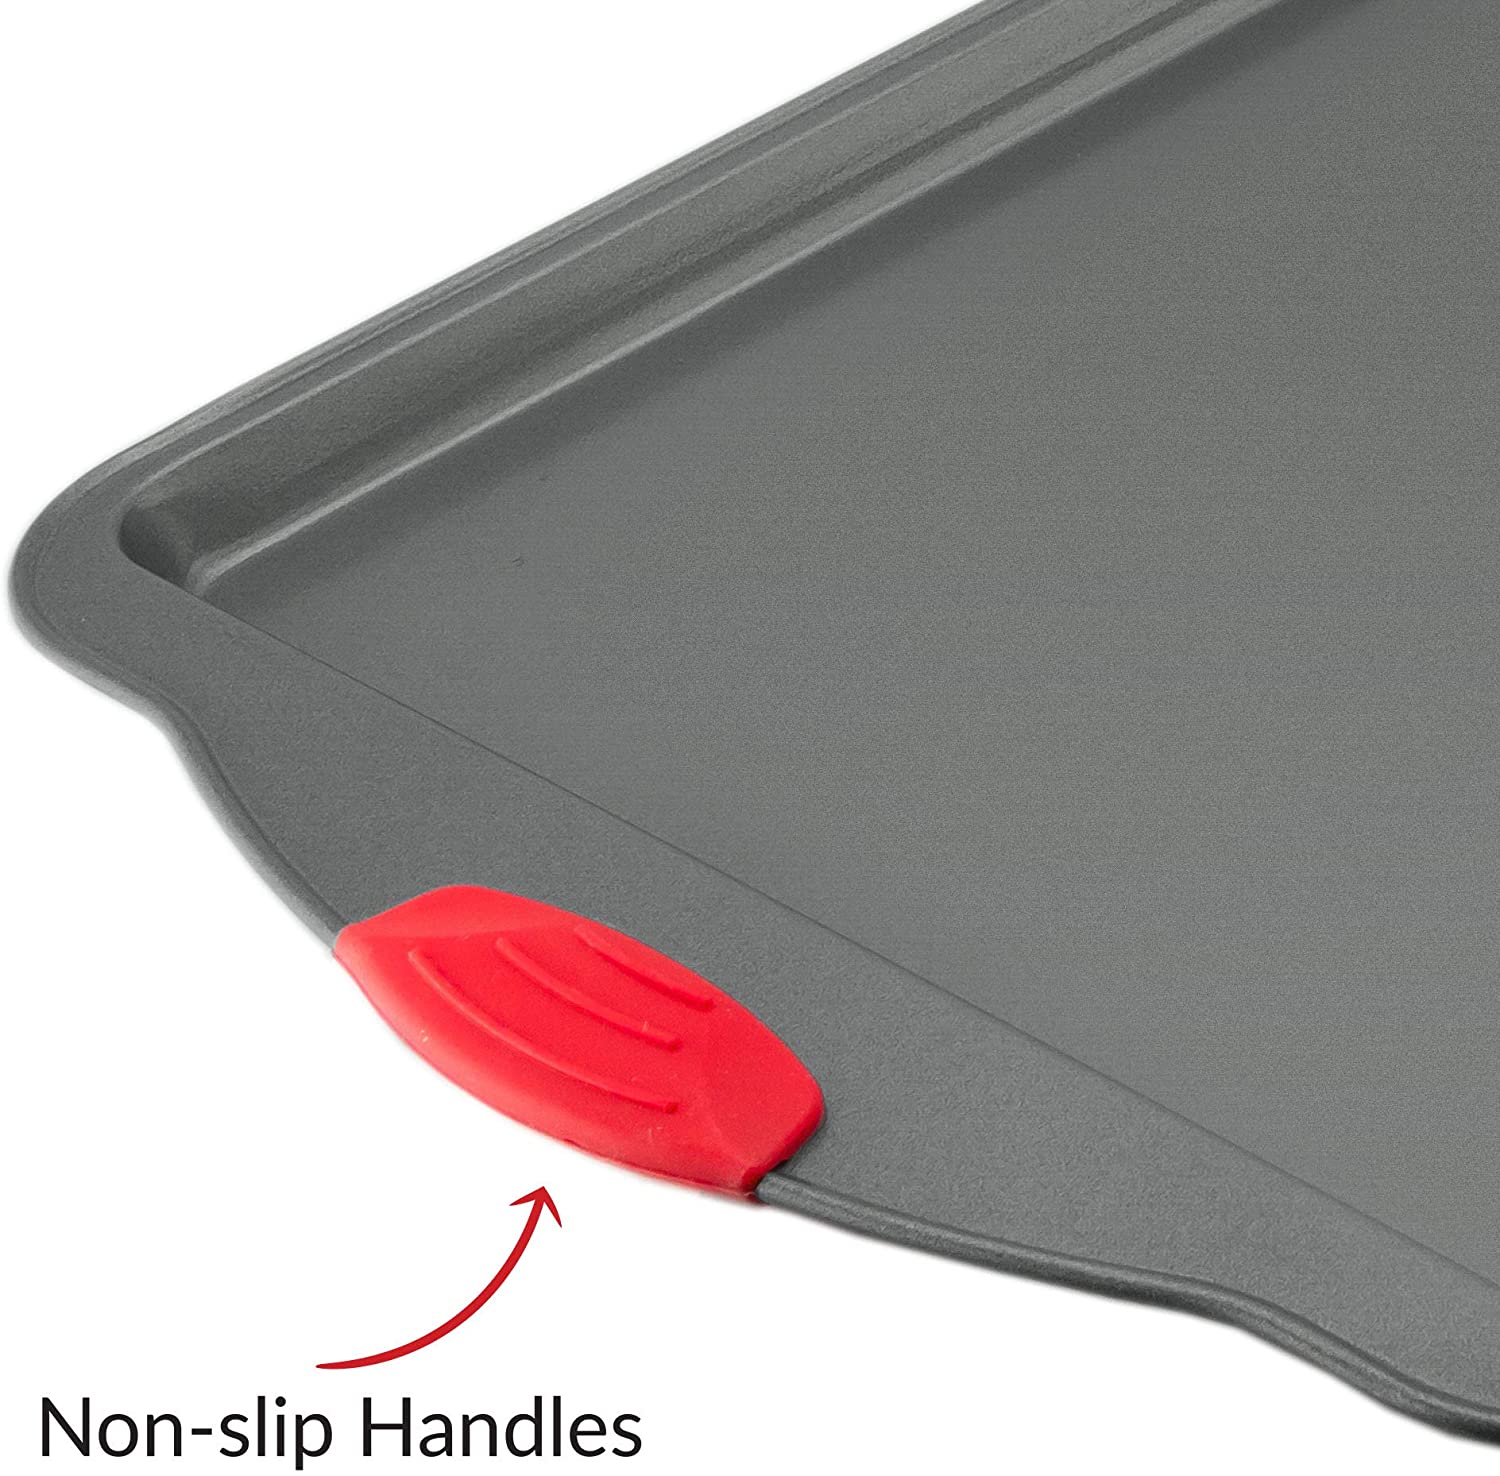 Nifty Solutions Set of 3 Non-Stick Cookie and Baking Sheets – Small, Medium  and Large Pans, Non-Stick Coated Steel